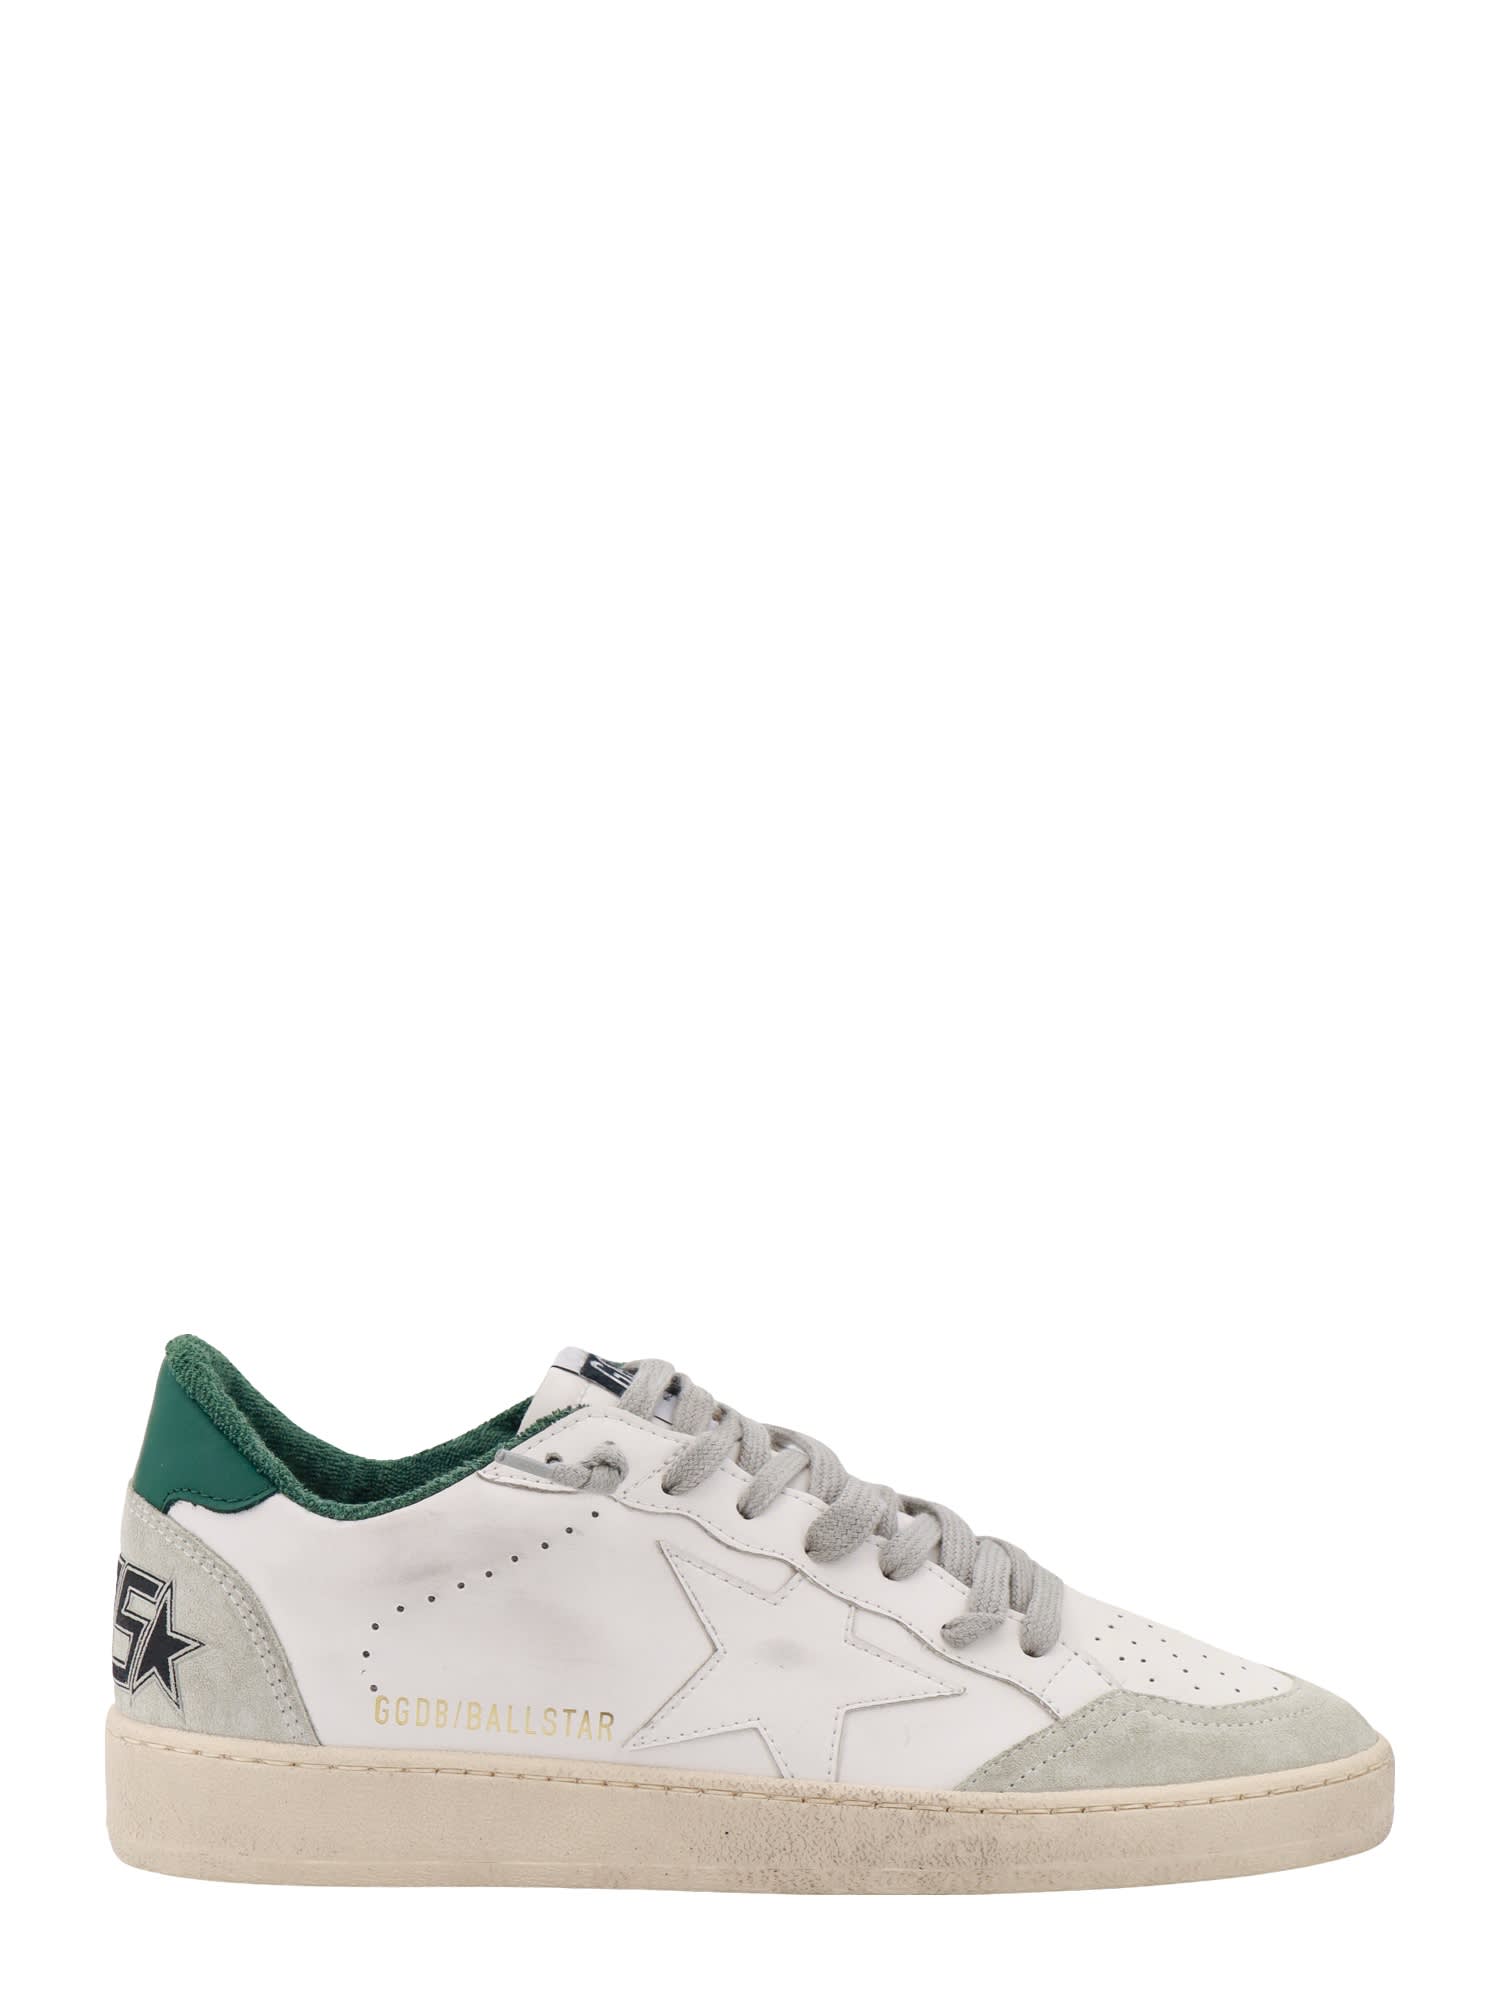 Shop Golden Goose Ball Star Sneakers In White Ice Green